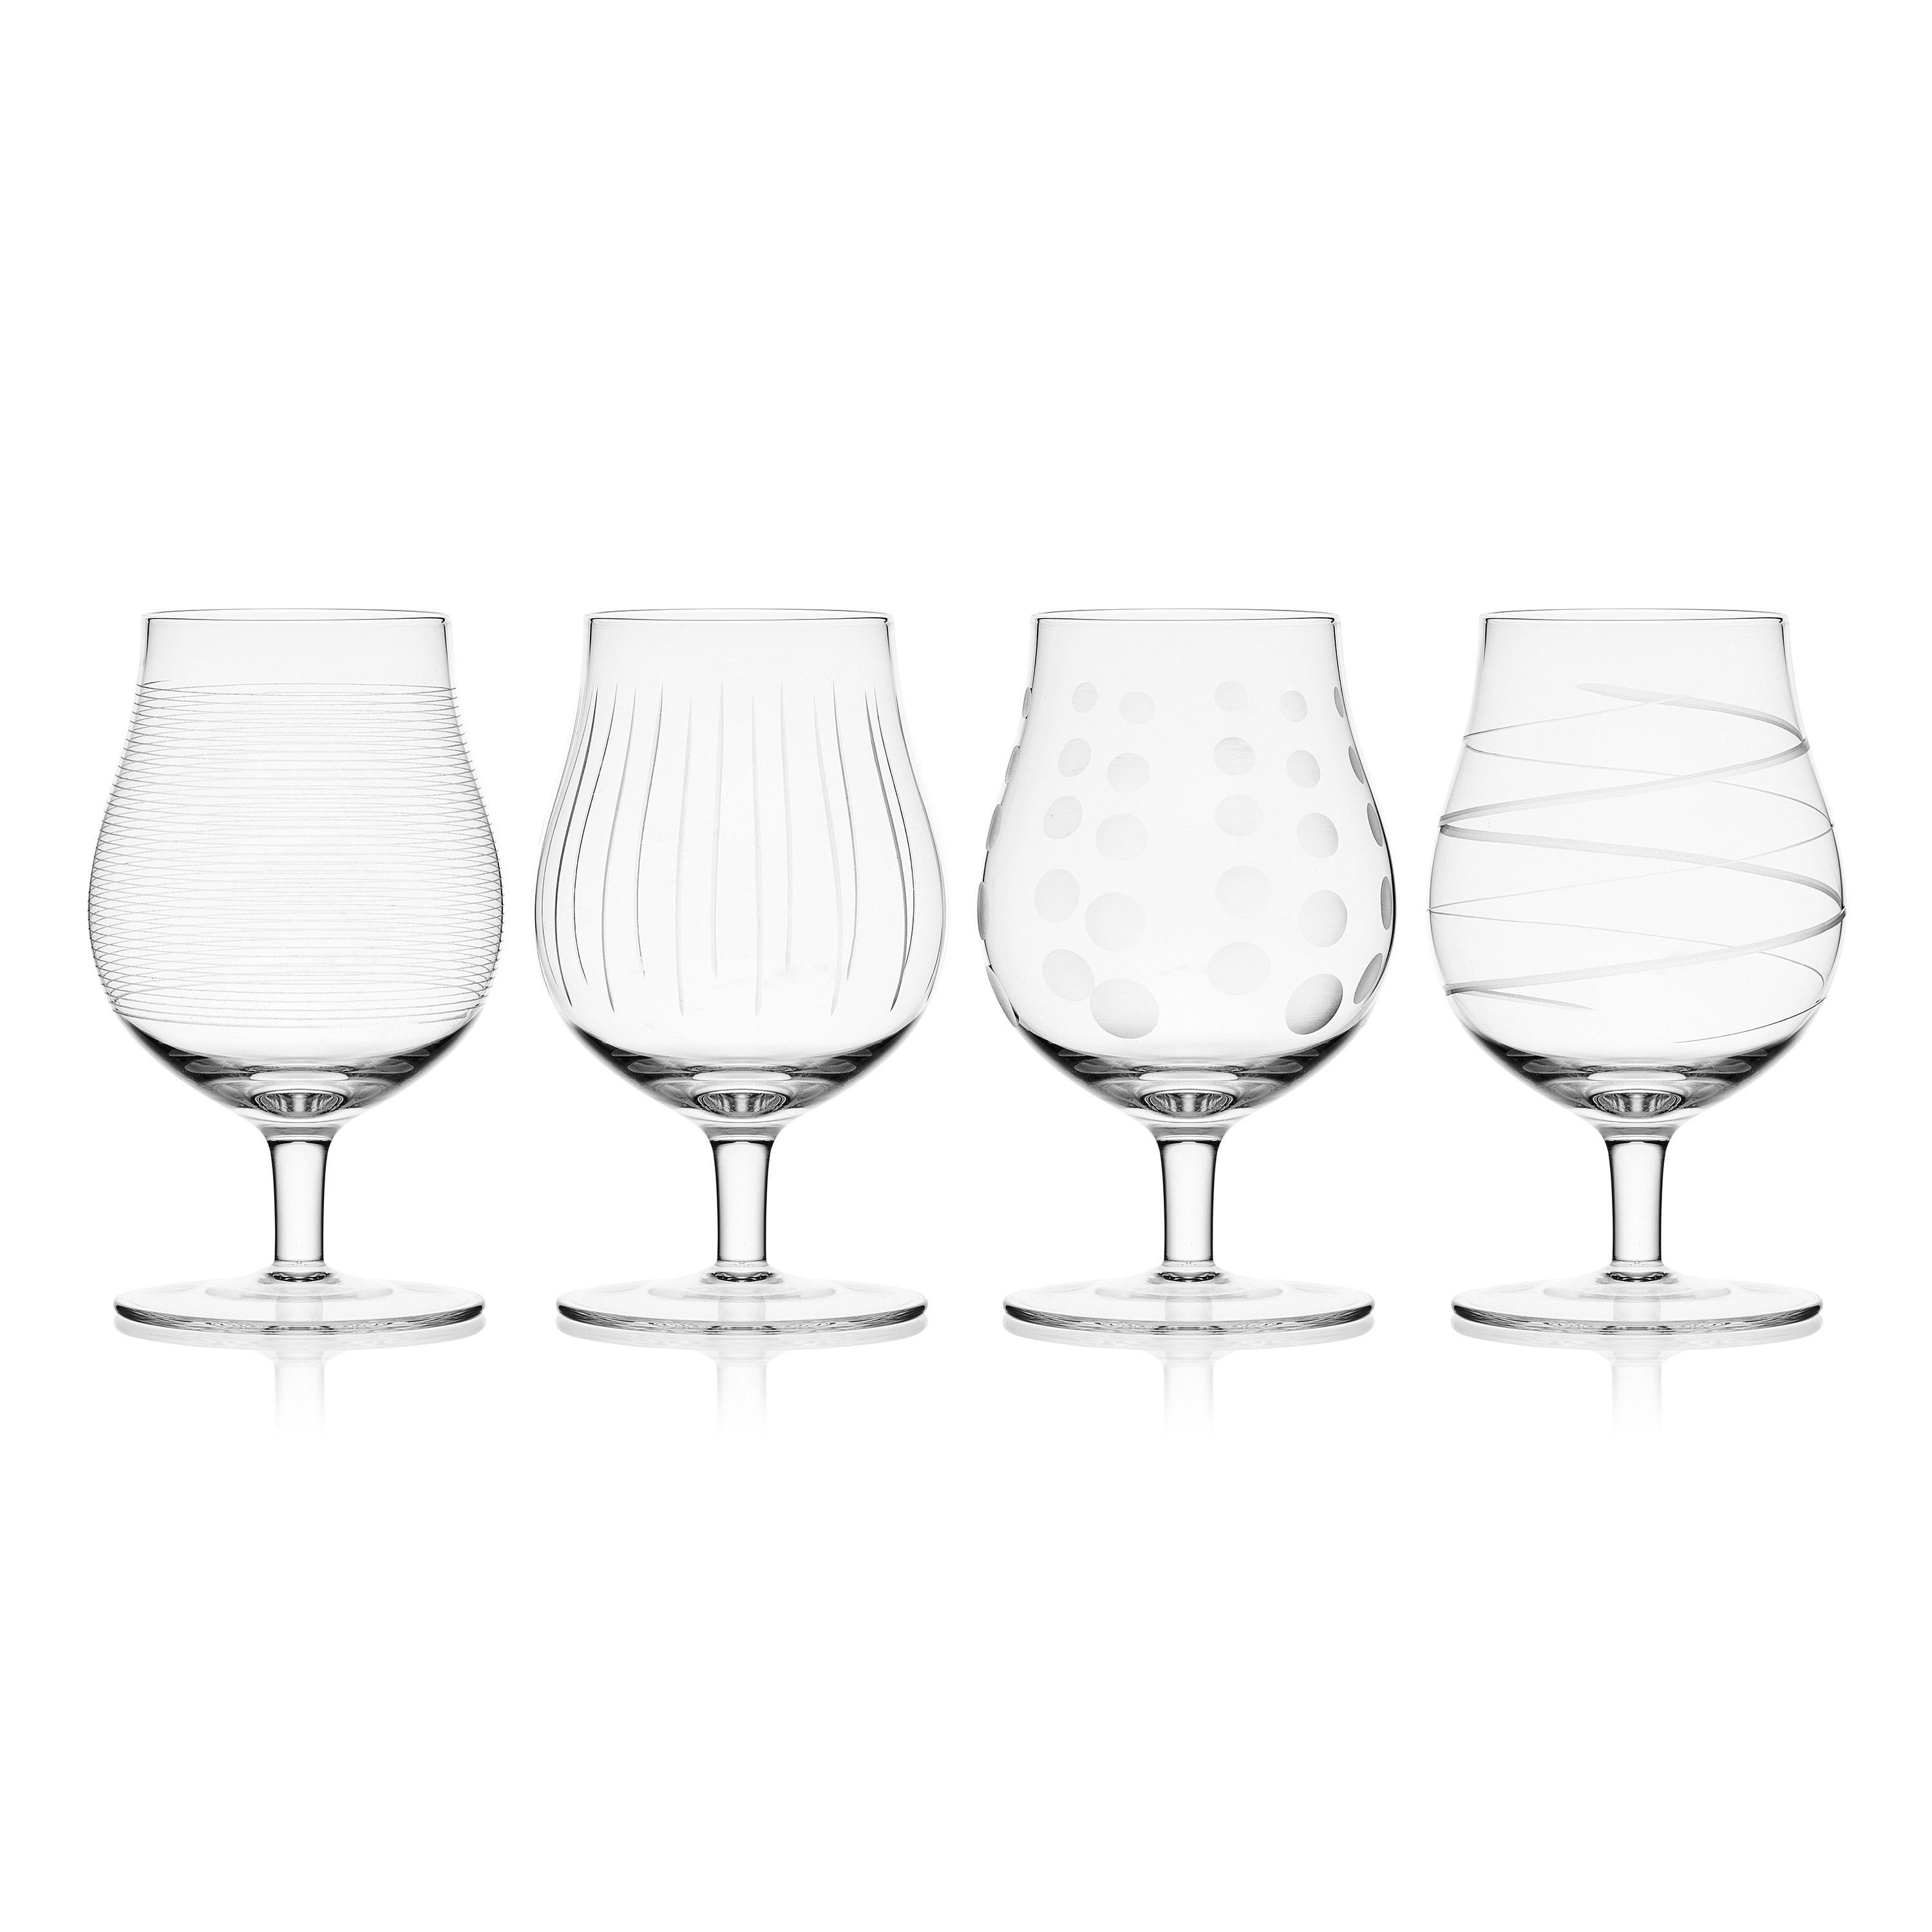 https://ak1.ostkcdn.com/images/products/is/images/direct/8de8c48902a4c61571dea8af160234f2a71c463c/Mikasa-Cheers-18OZ-Belgian-Beer-Glass%2C-Set-of-4.jpg